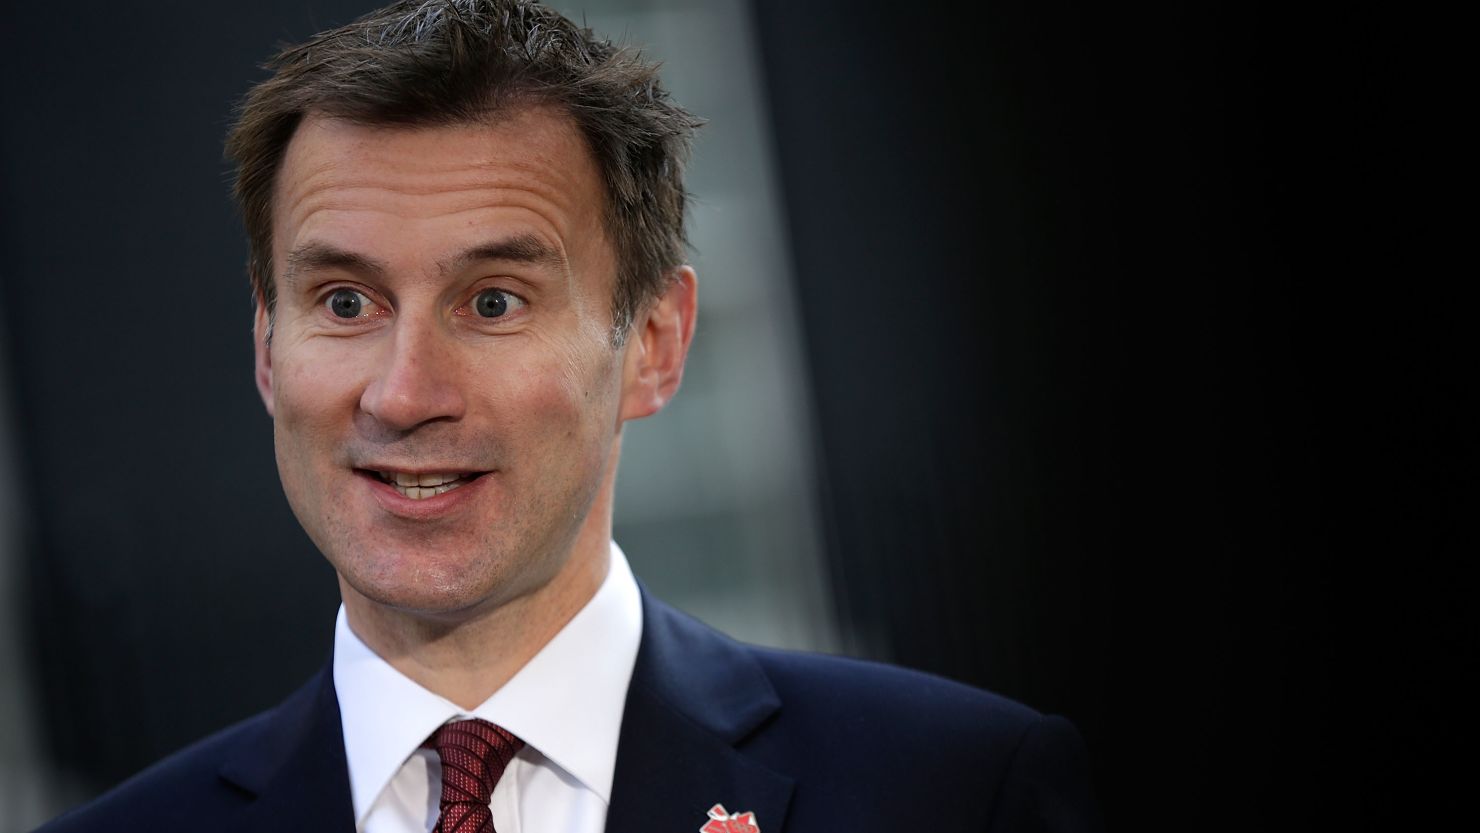 Jeremy Hunt has been under pressure over his contacts with Rupert Murdoch's News Corp.